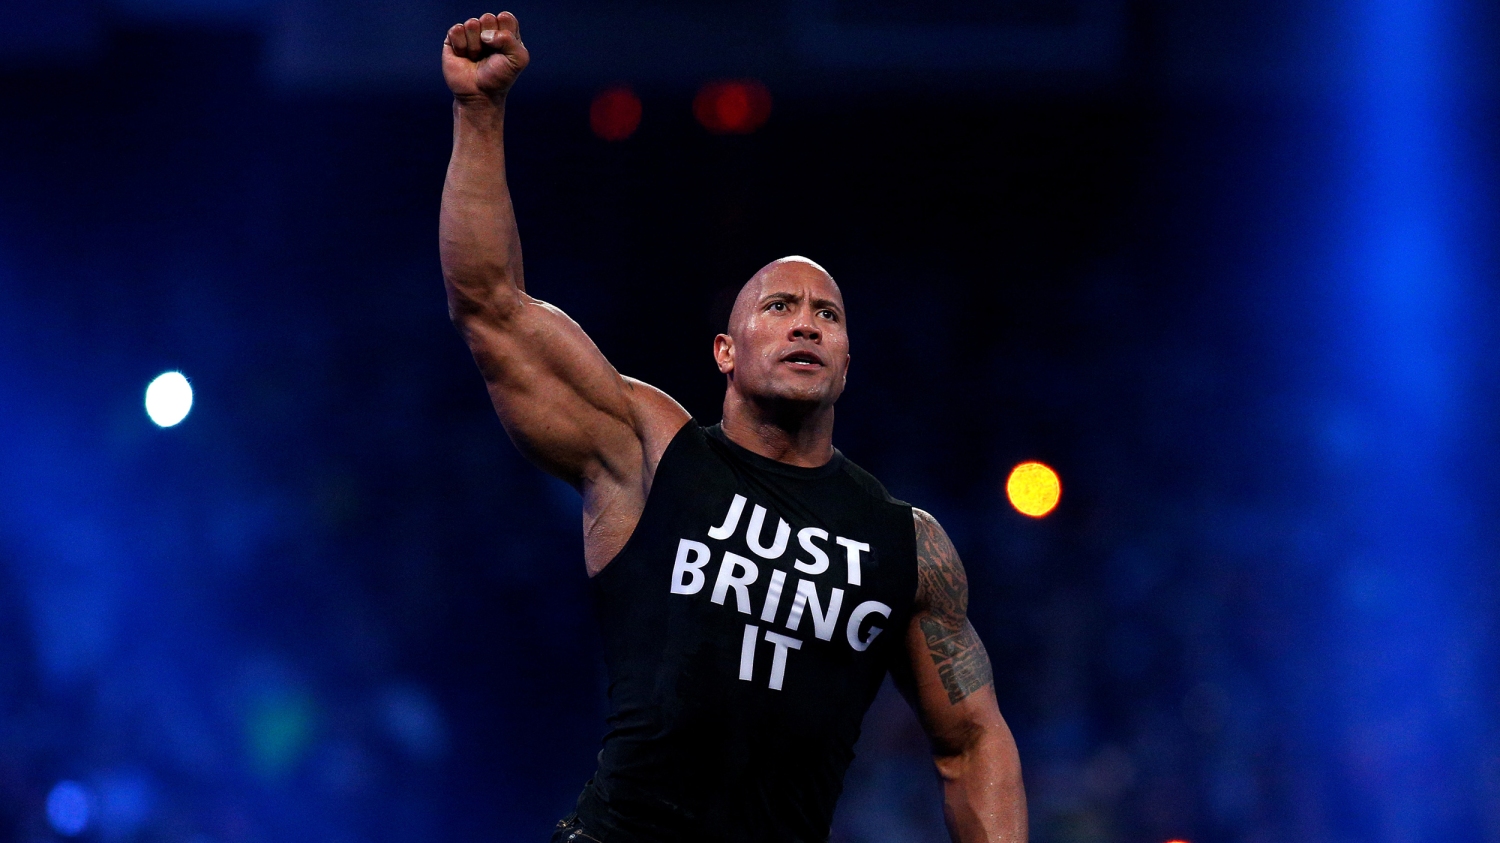 'The Rock' means Dwayne Johnson, who will return to the ring after 15 years, tweeted: finally returned home